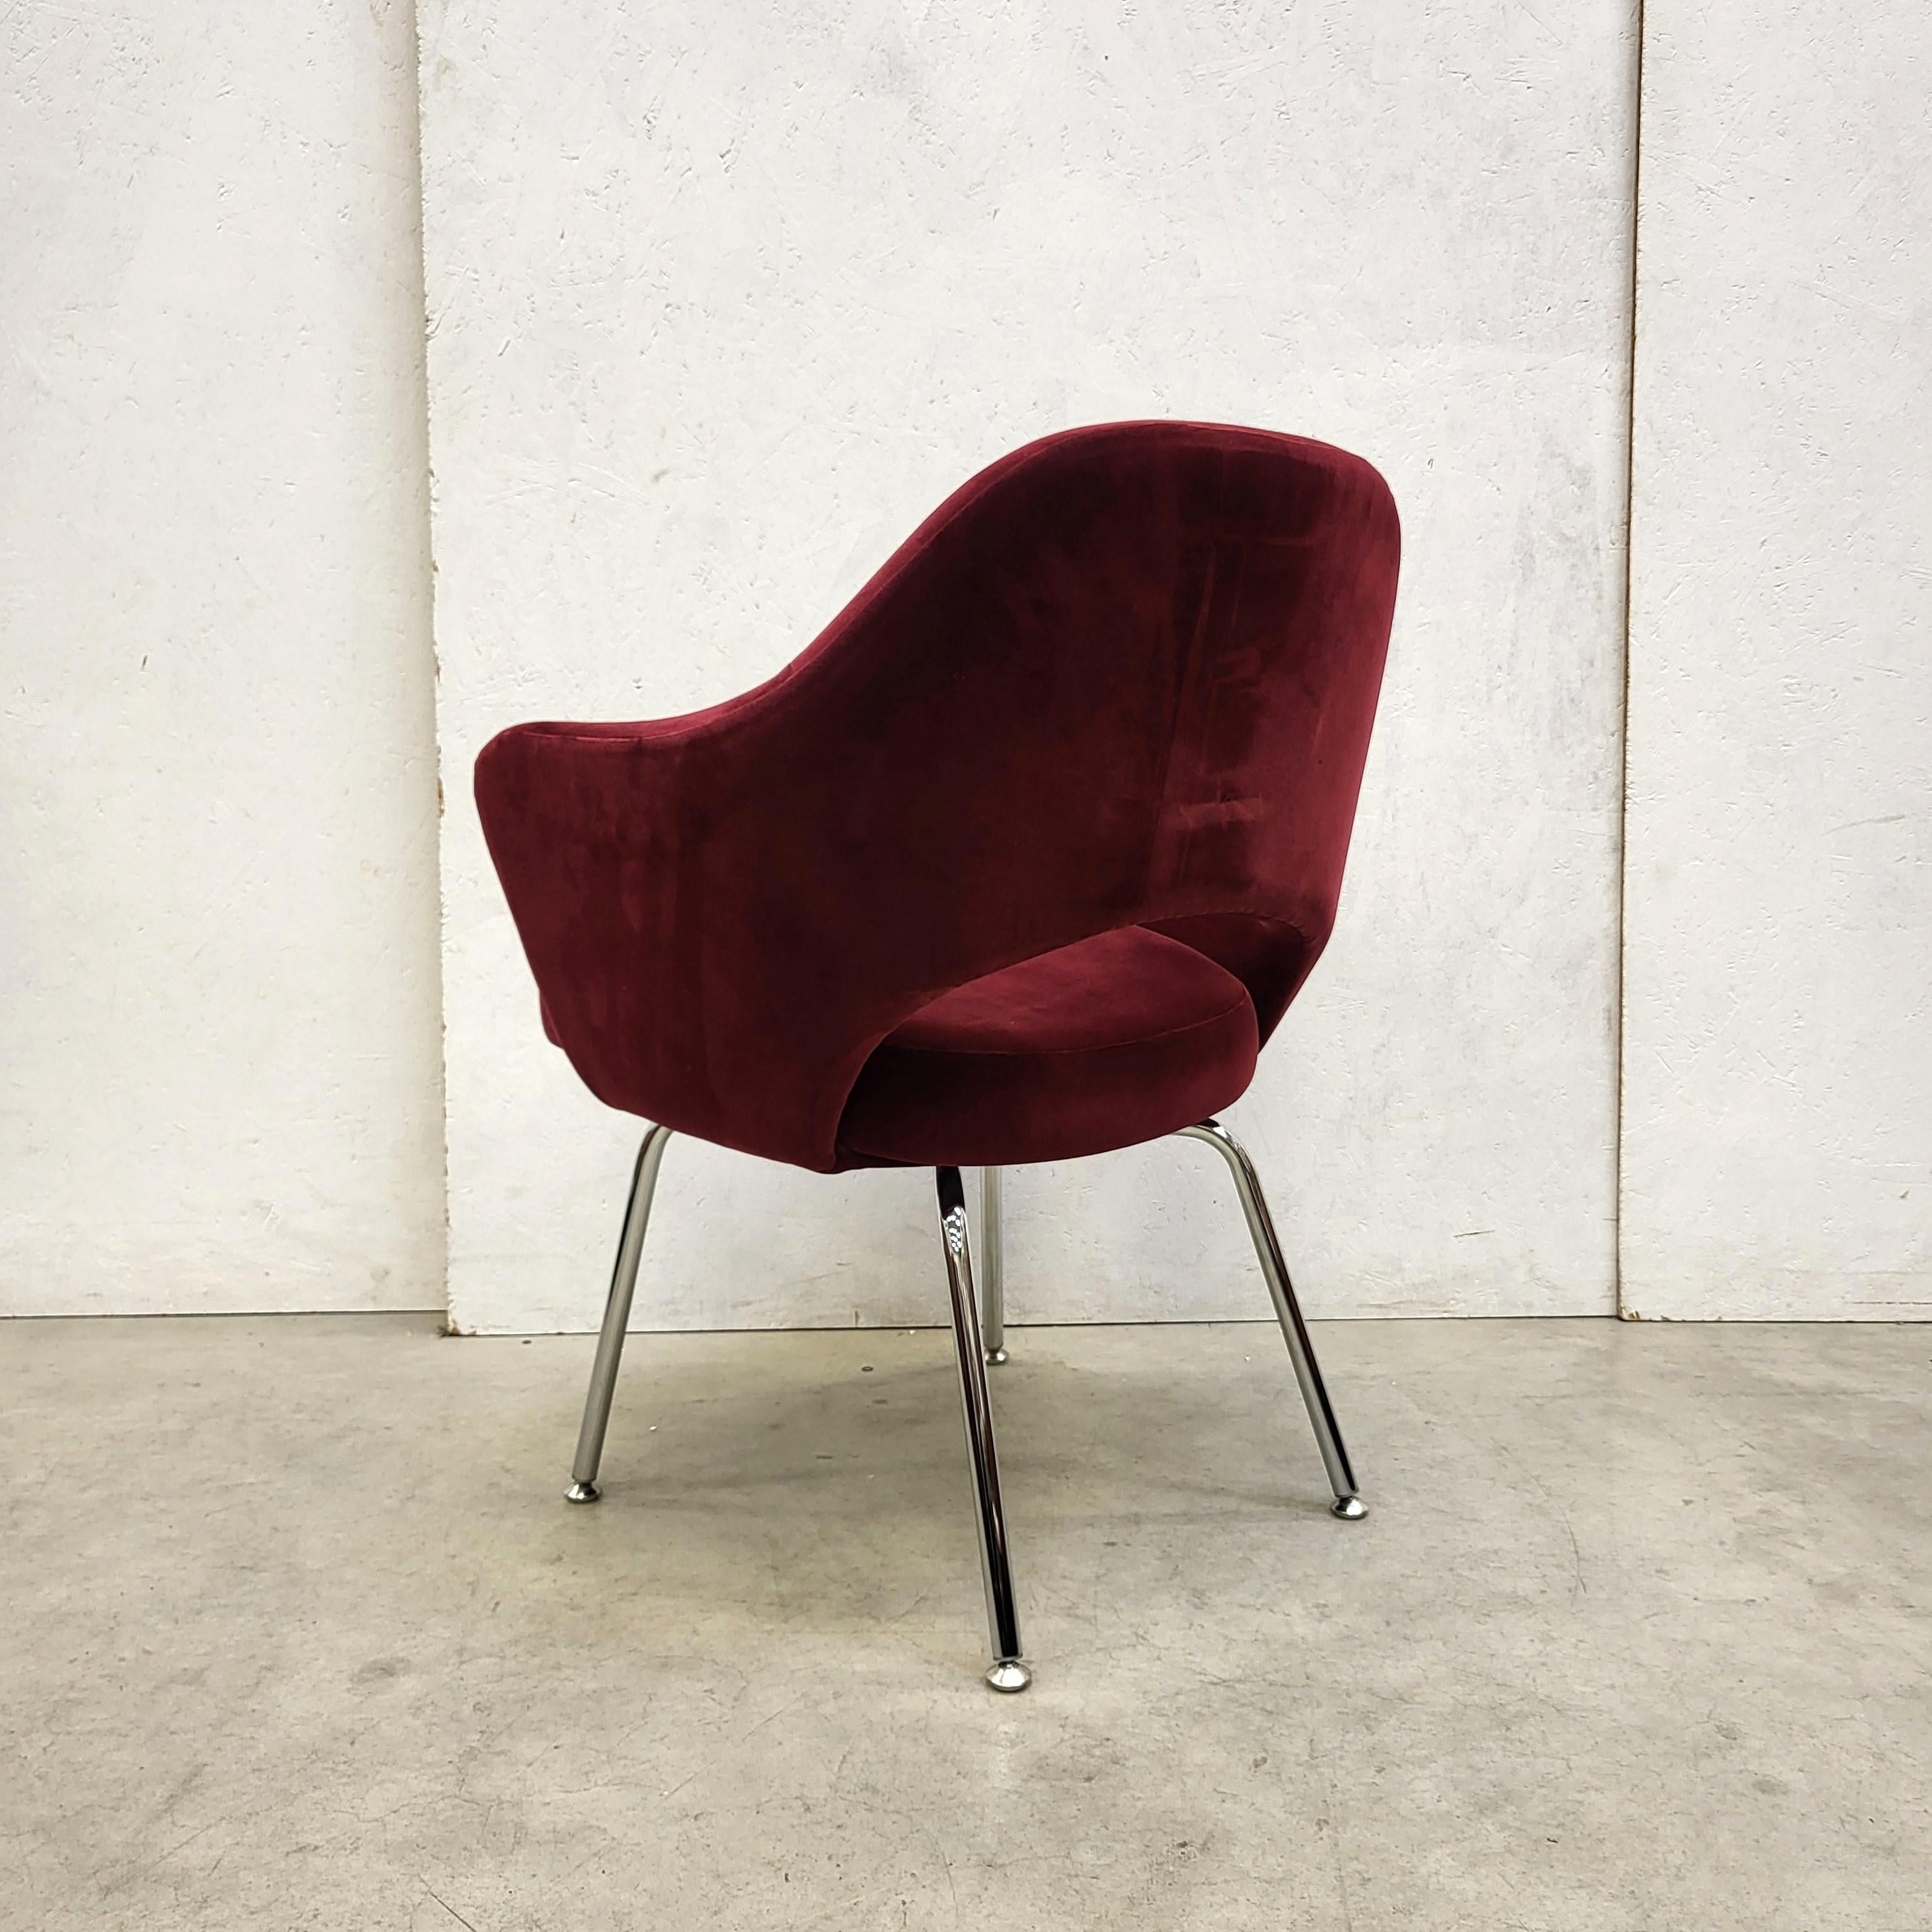 Contemporary Knoll Executive Chair by Eero Saarinen Bayberry Velvet Set of 4, 2010